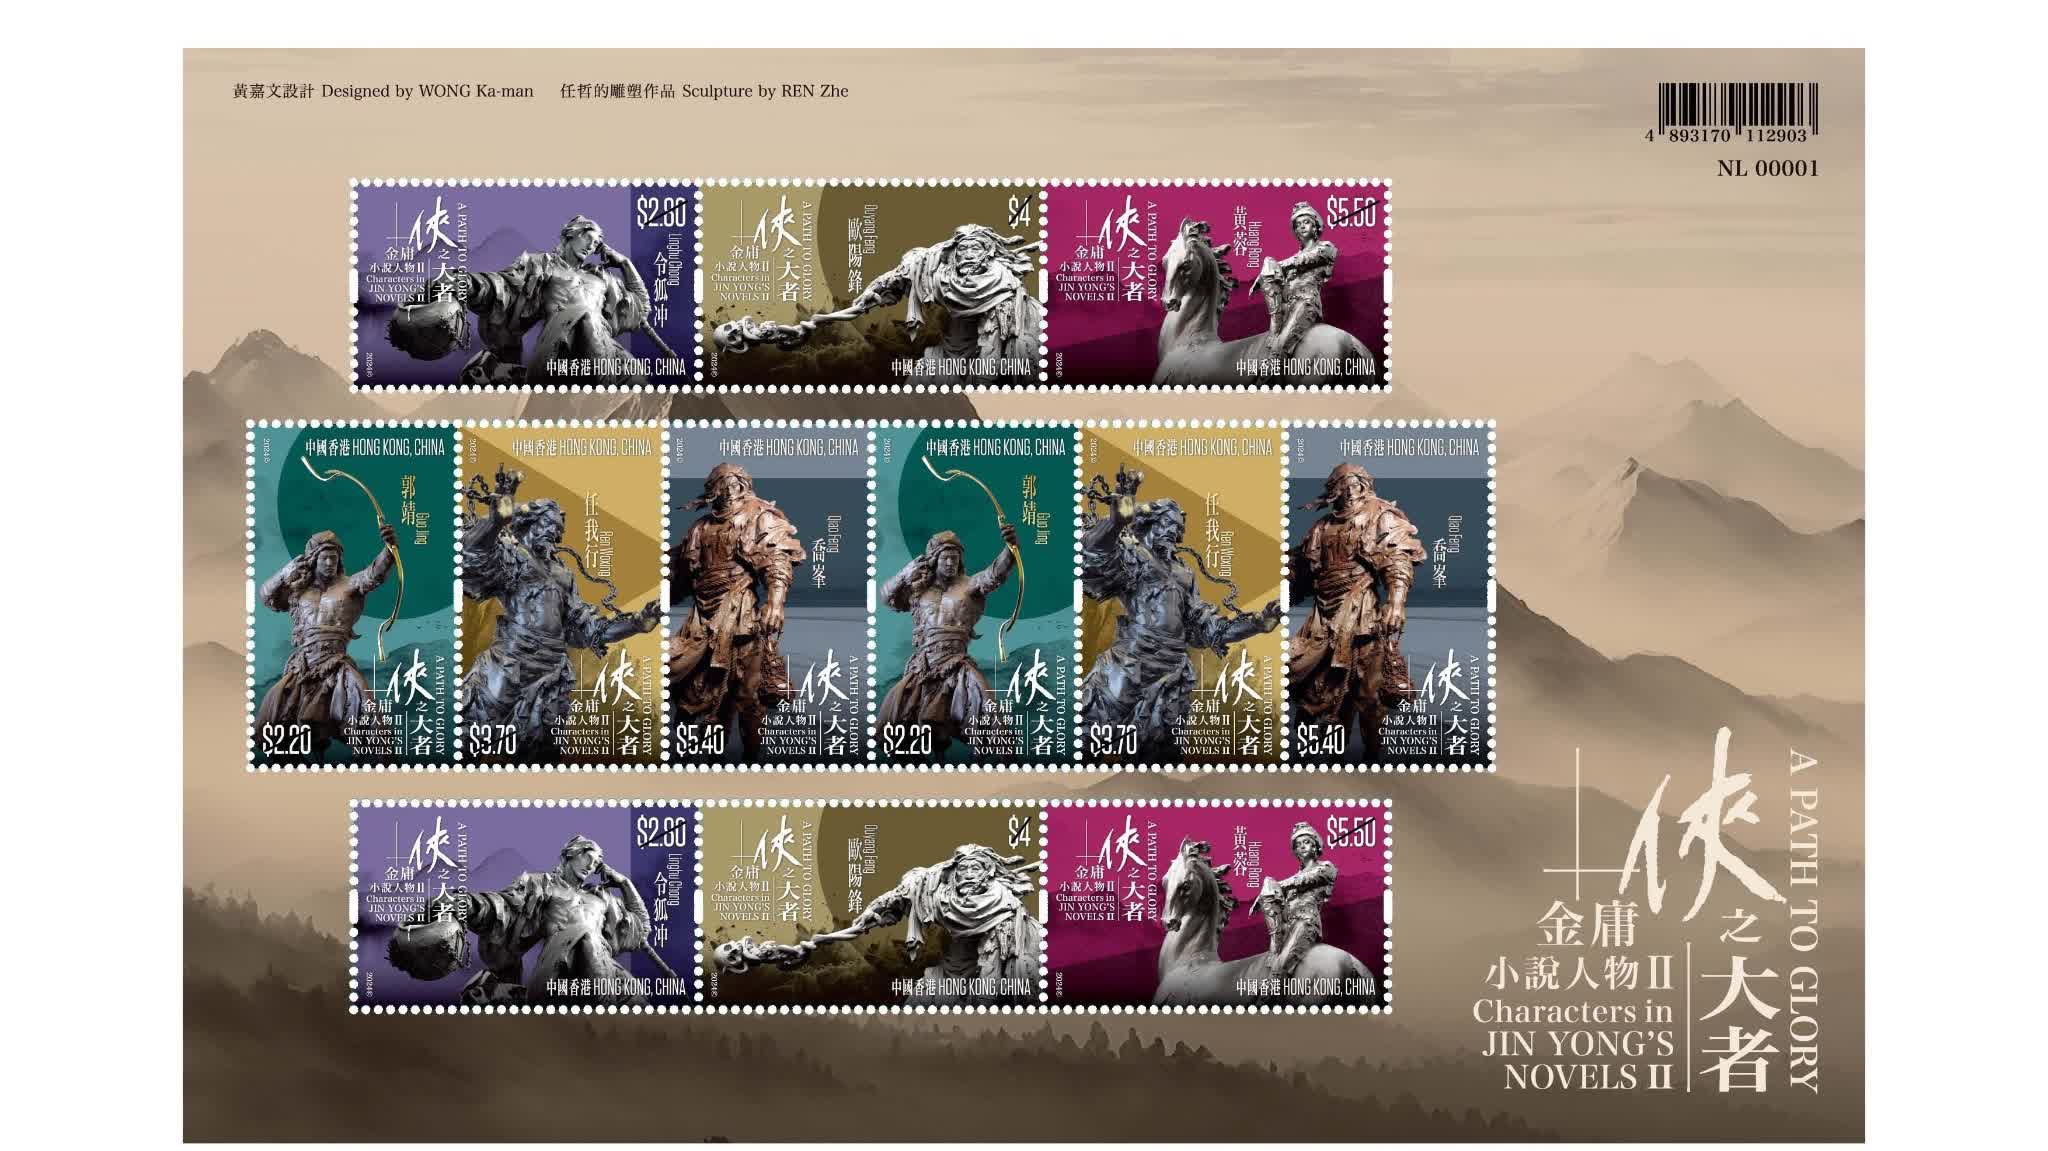 Hongkong Post to issue special stamps featuring Jin Yong's characters